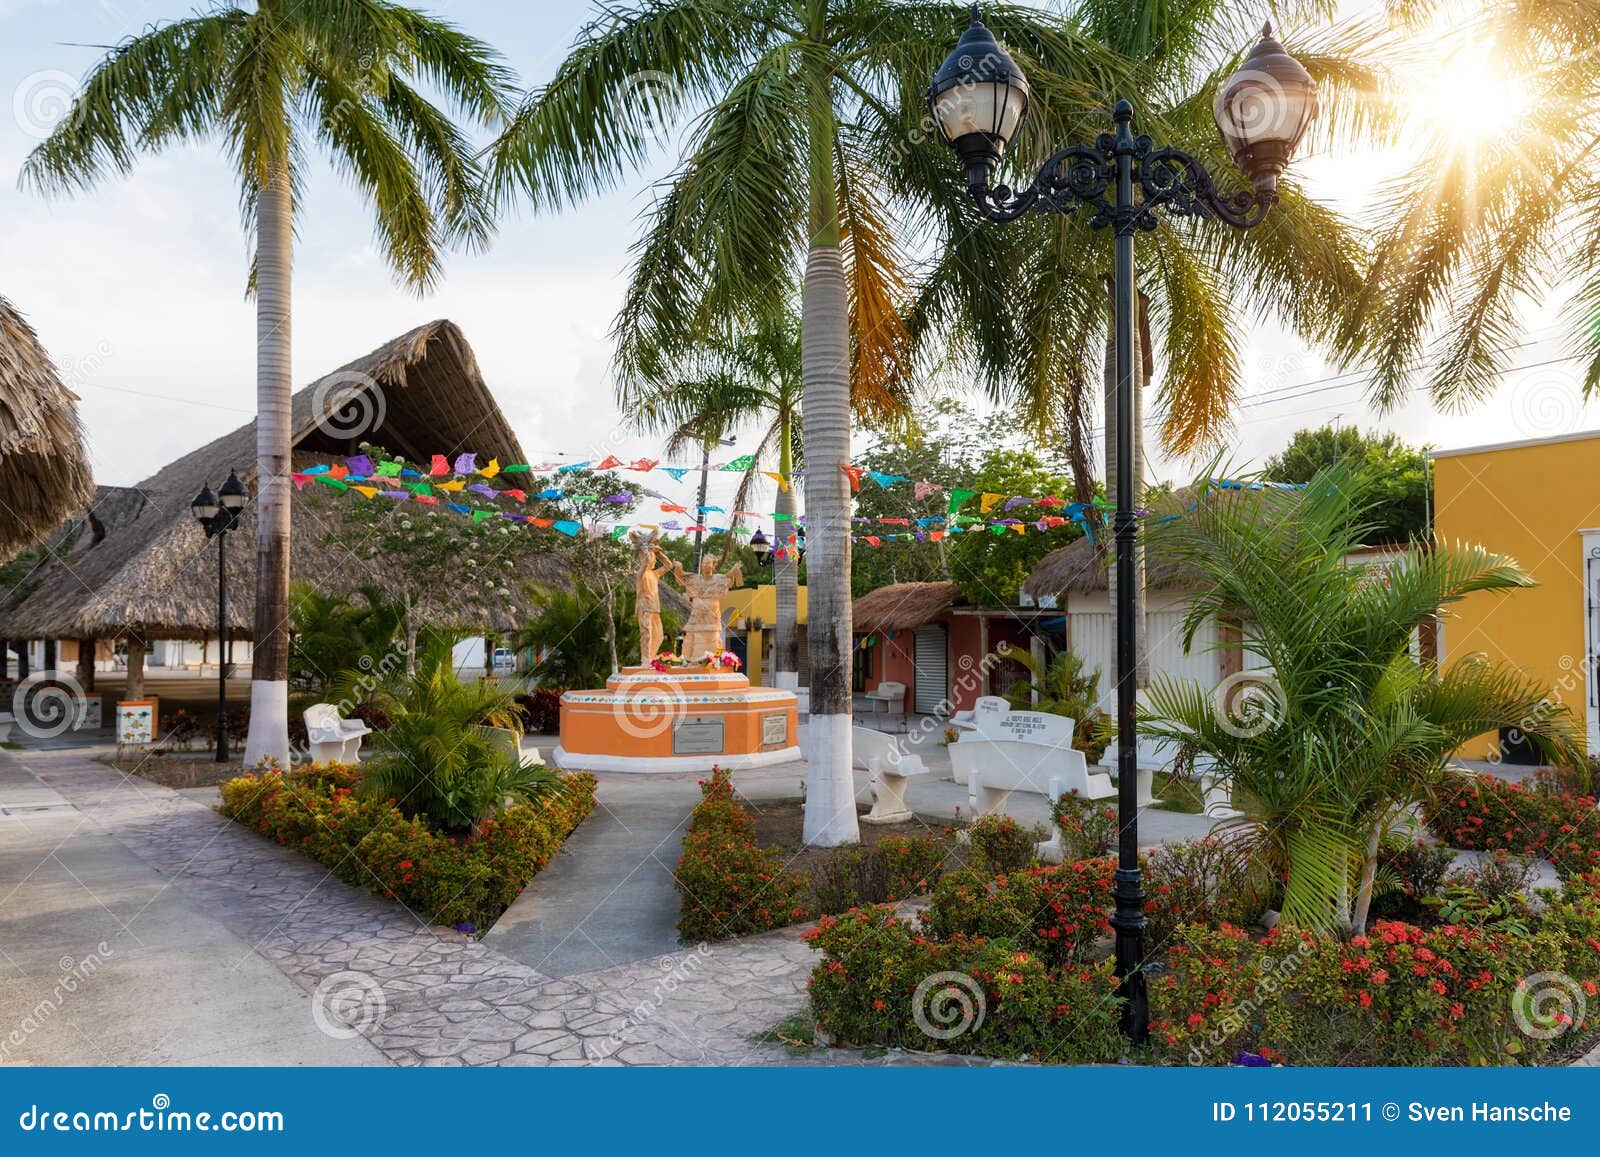 The Old Mayan Village El Cedral on Cozumel Island, Mexico Stock Image -  Image of memory, nature: 112055211